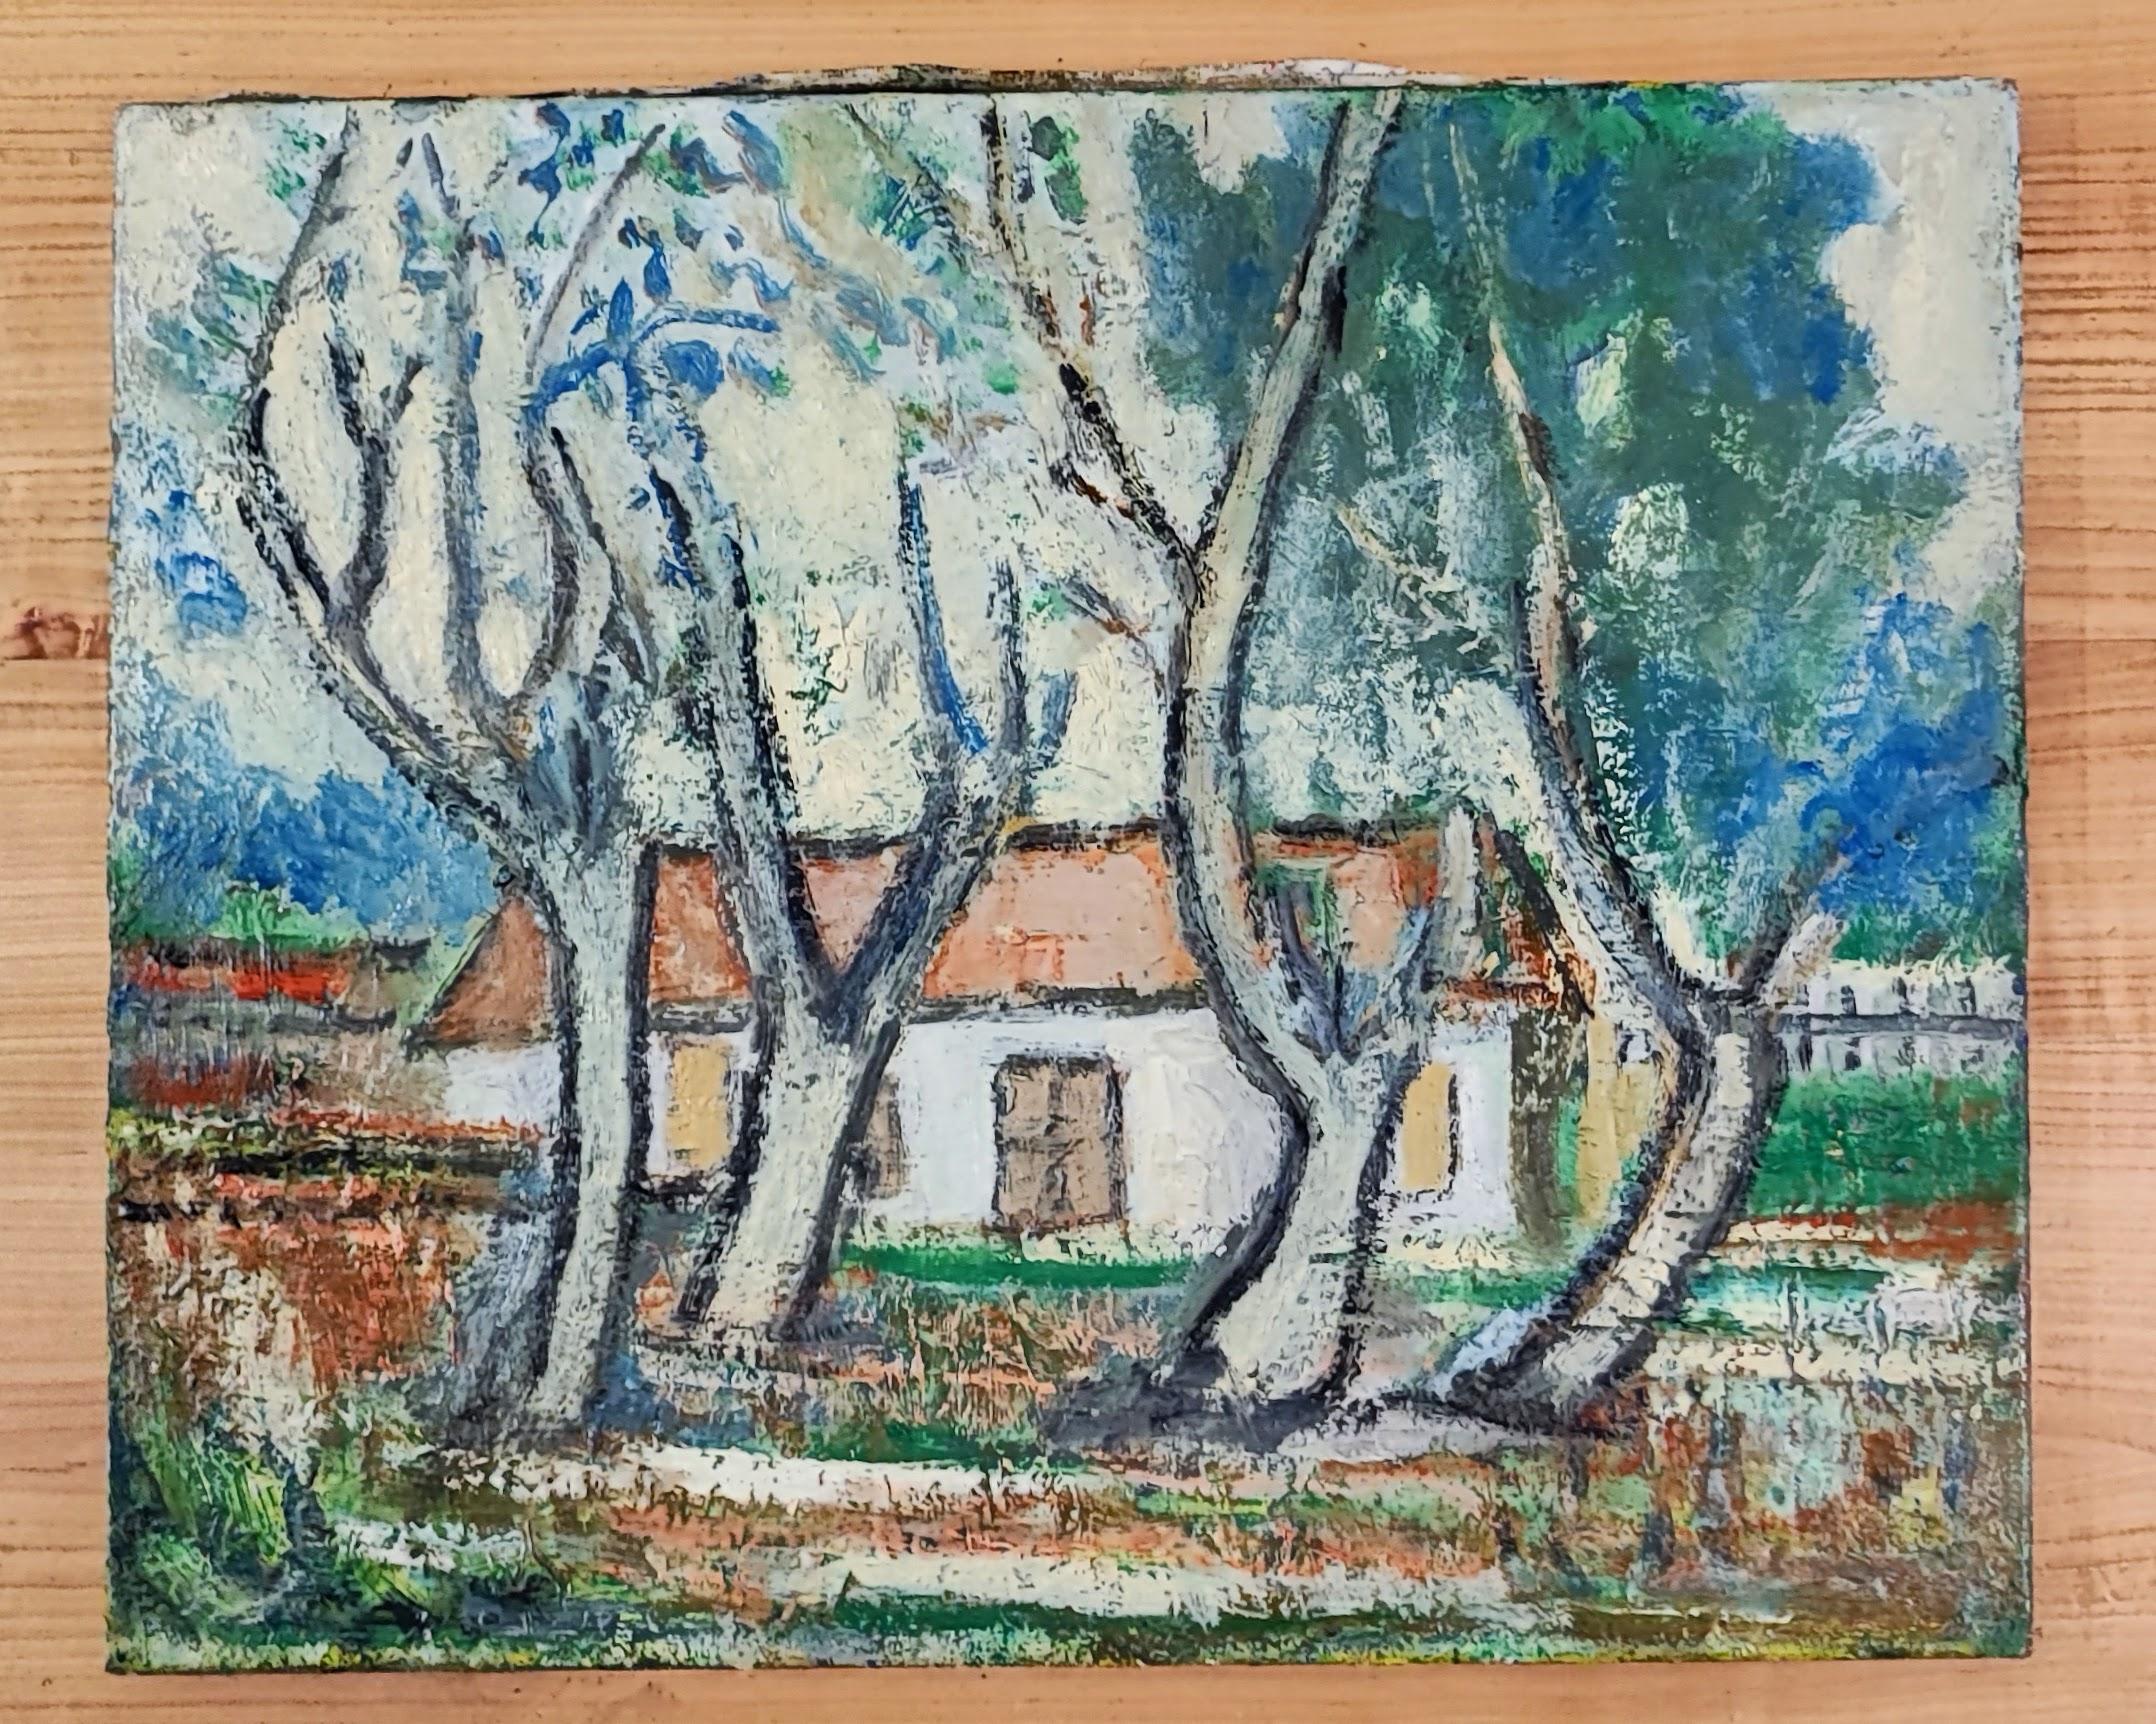 Waterfront house through the trees - Painting by Unknown